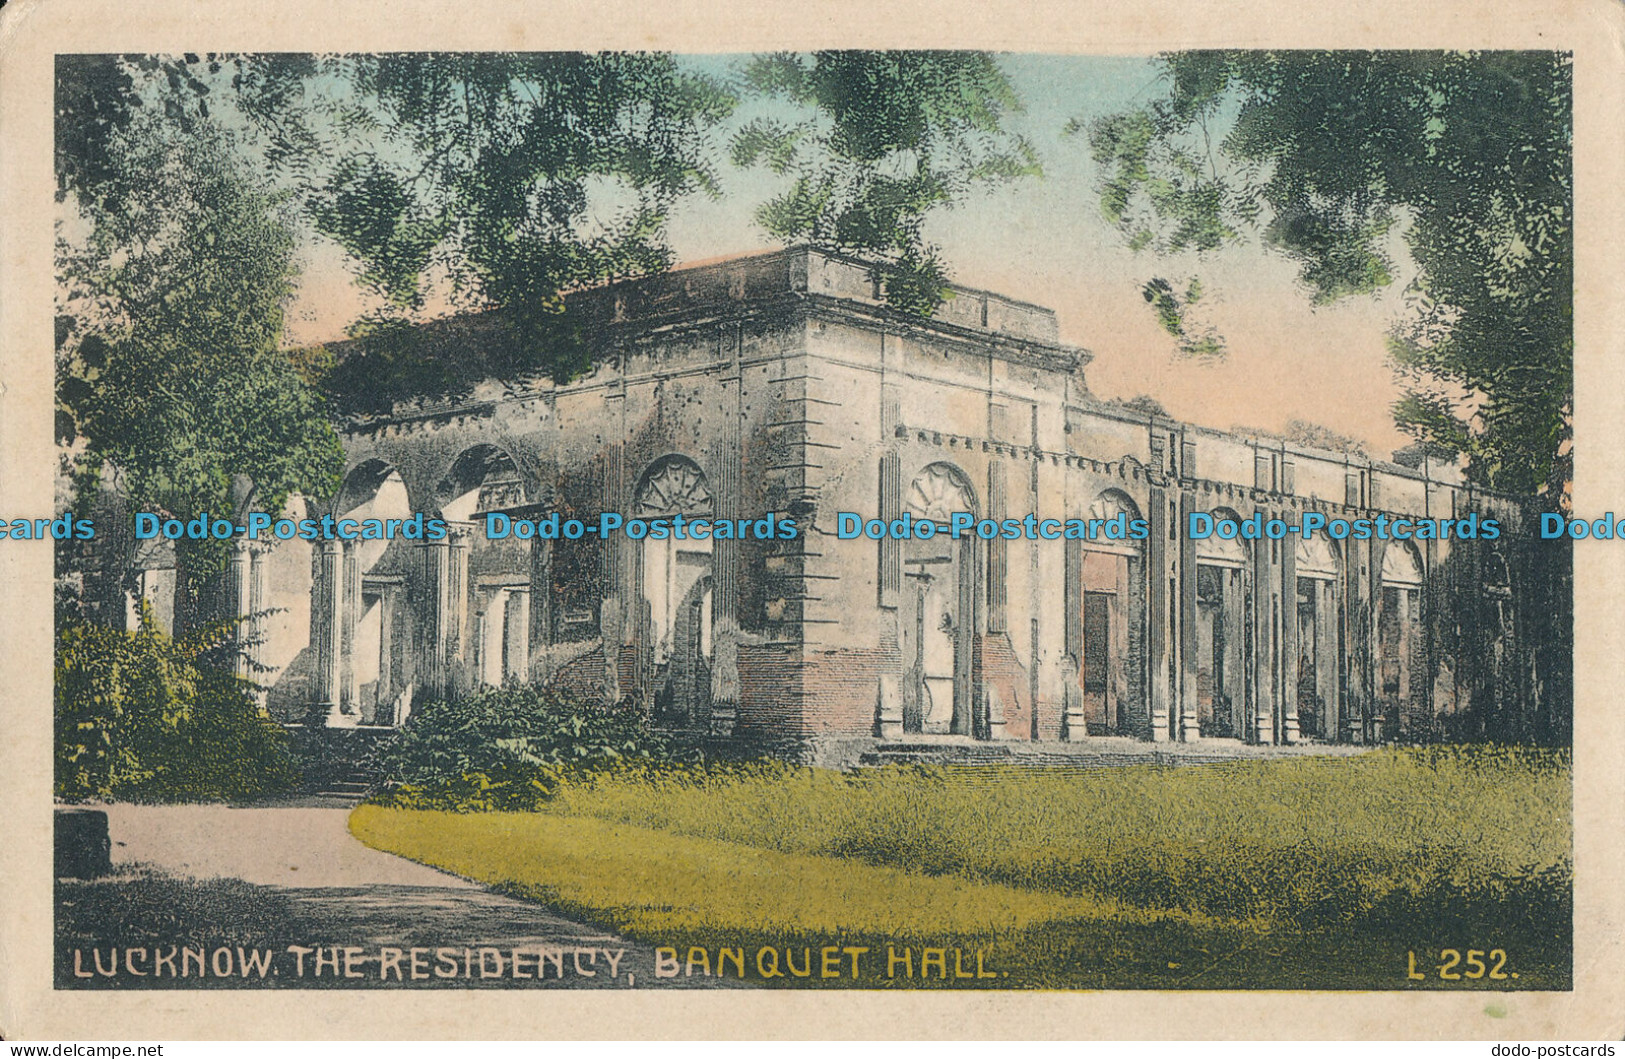 R010754 Lucknow. The Residence. Banquet Hall. D. Macropolo. No L252. B. Hopkins - Monde